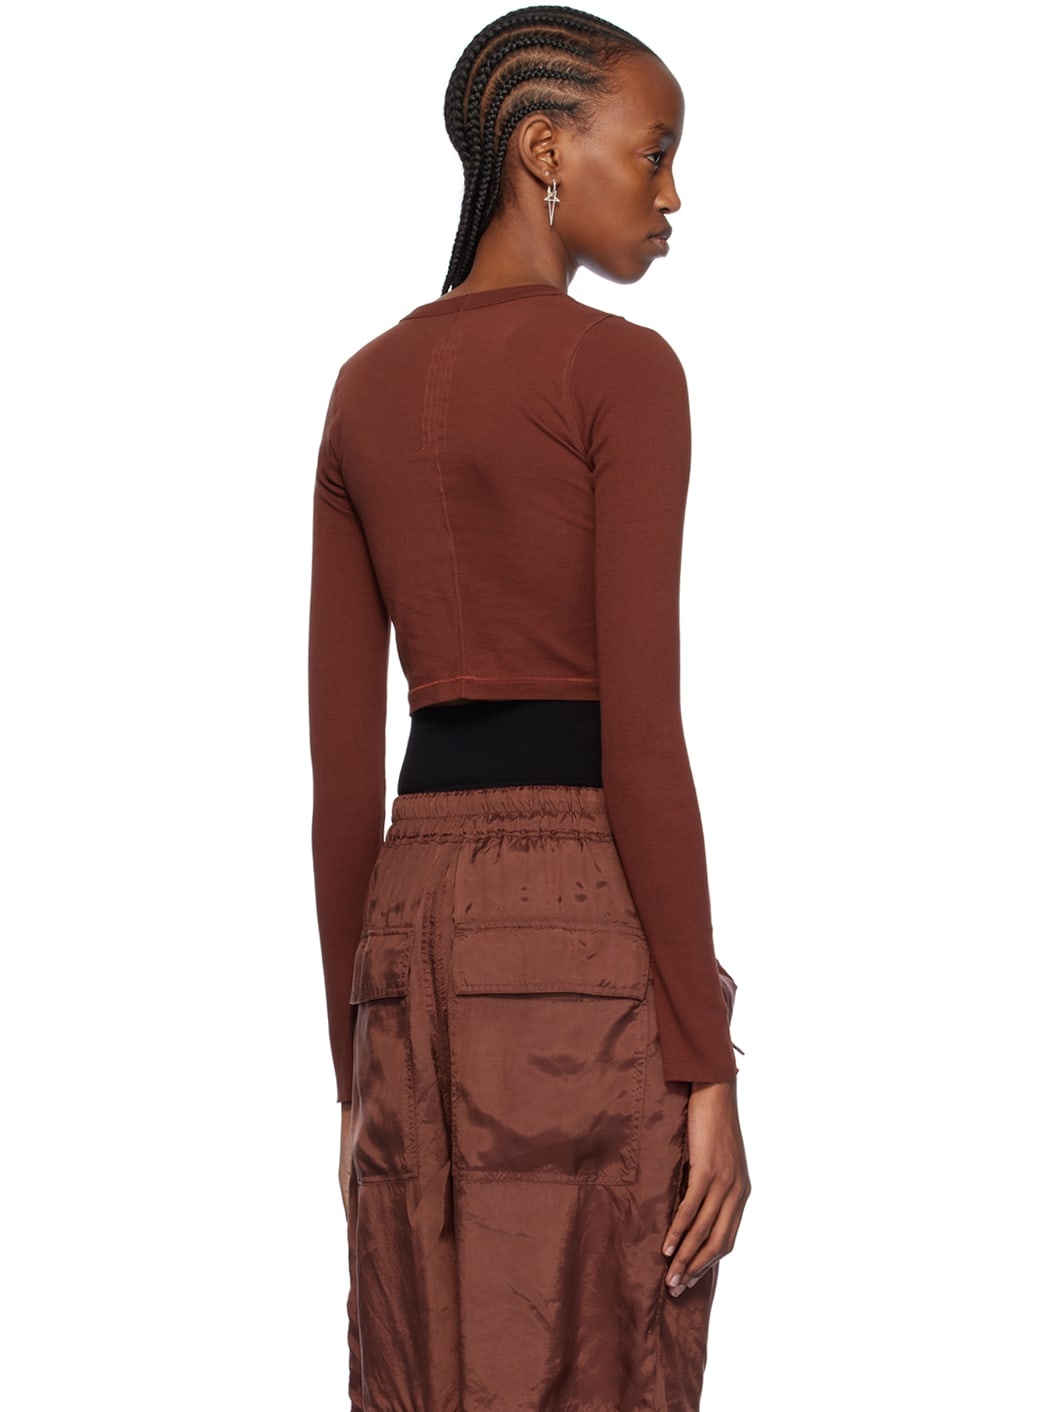 Brown Cropped Long Sleeve T-Shirt - 3